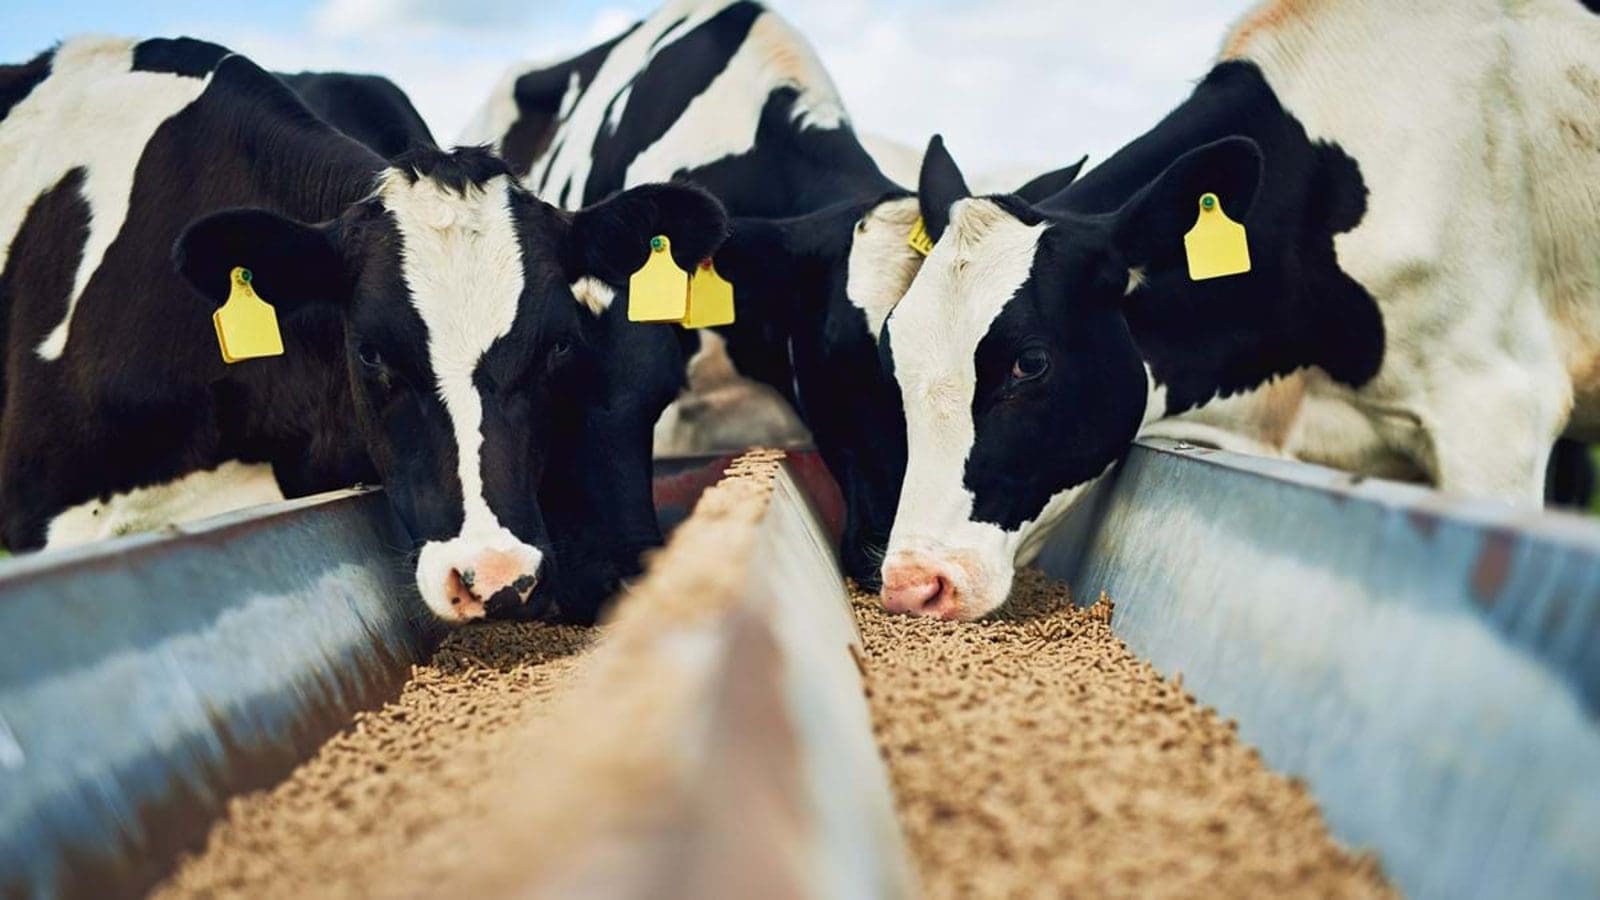 Methane-reducing feed additive “Bovaer” receives UK regulatory approval